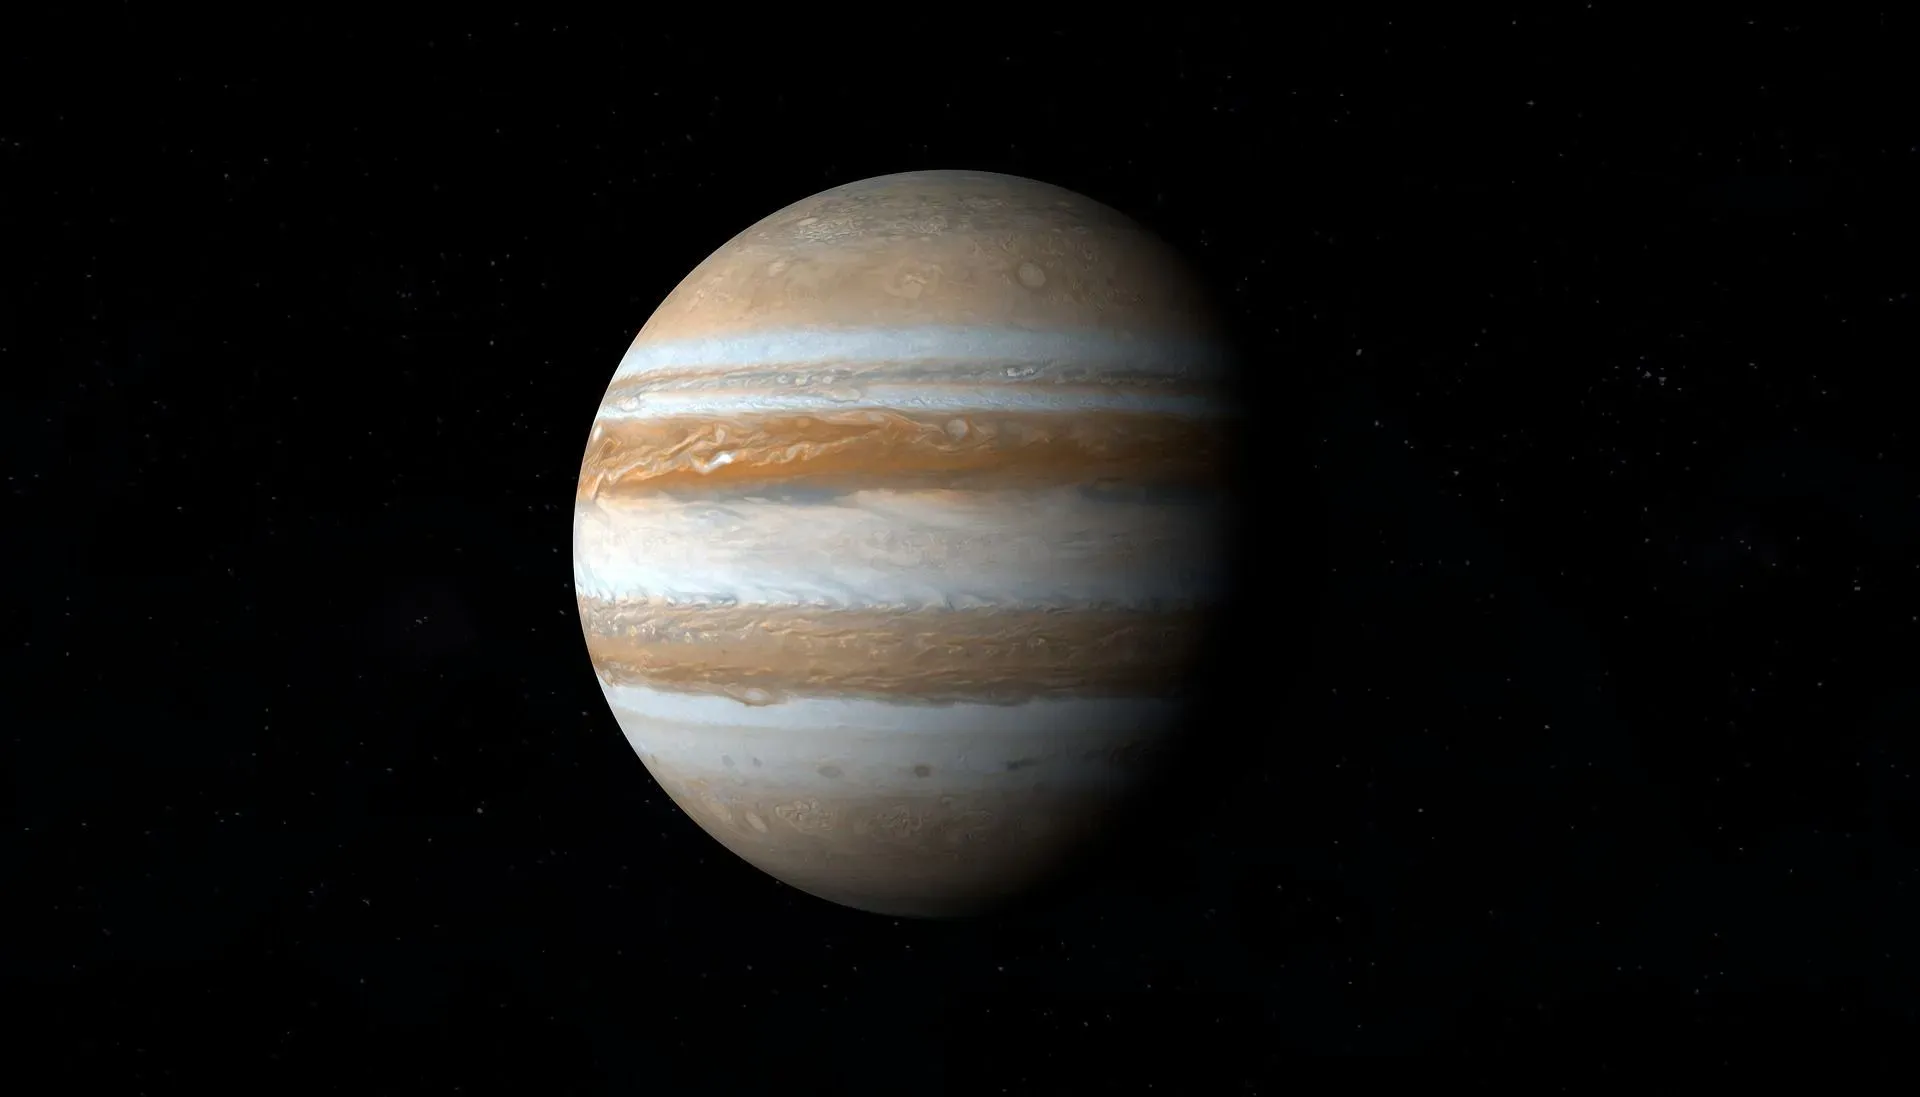 Read some interesting facts about the characteristics of Jupiter here.